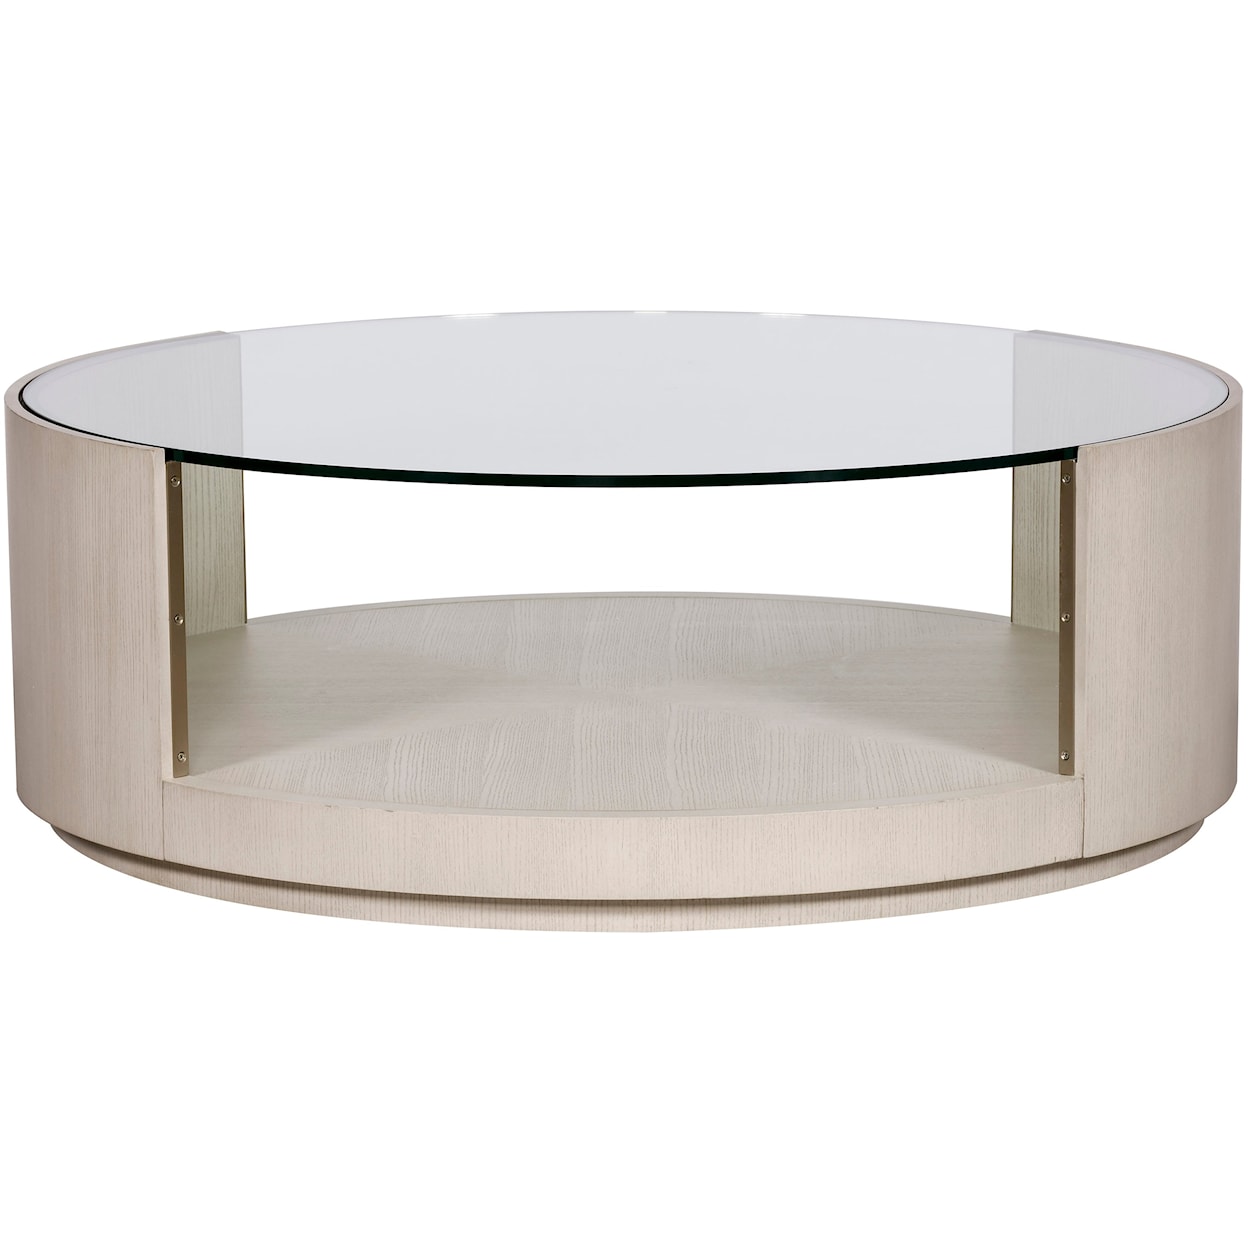 Vanguard Furniture Axis Cocktail Table with Glass Top